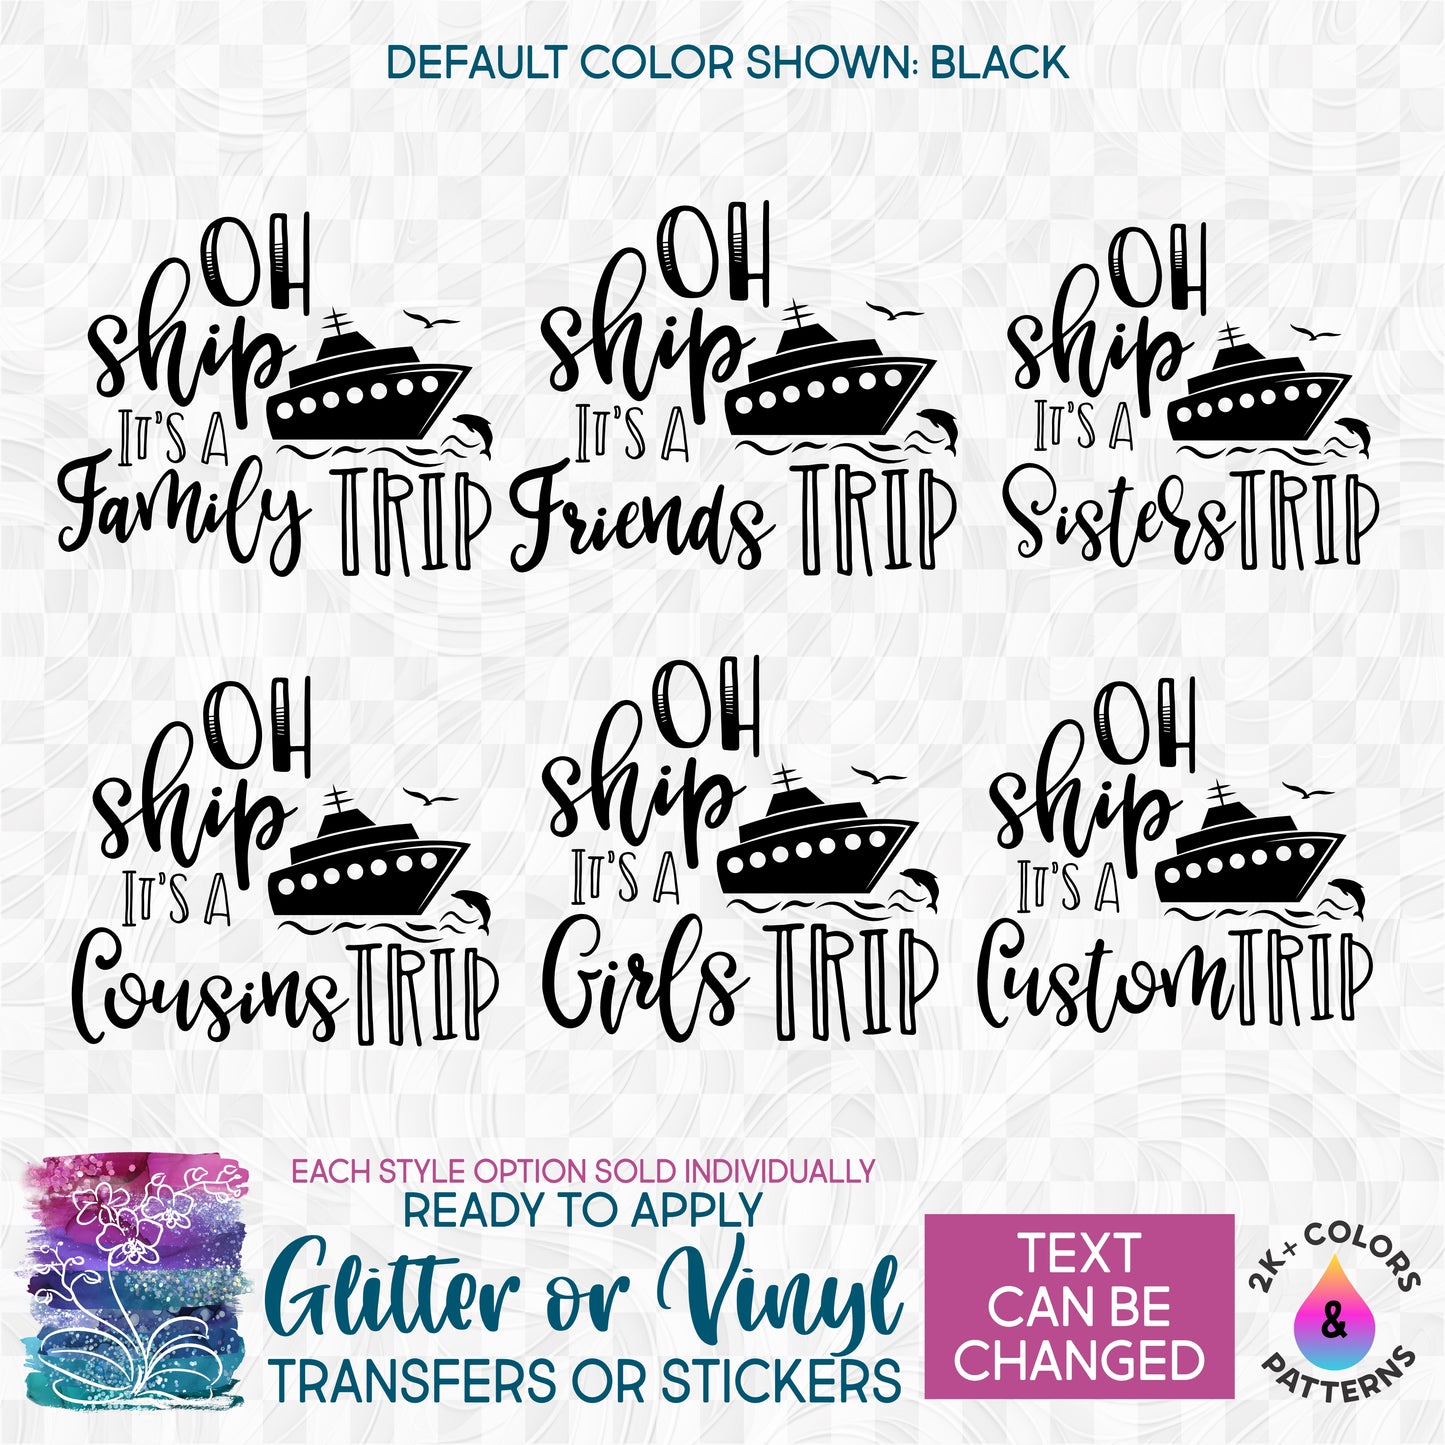 (s303-1E) Oh Ship It's a Family Trip, Cruise Glitter or Vinyl Iron-On Transfer or Sticker